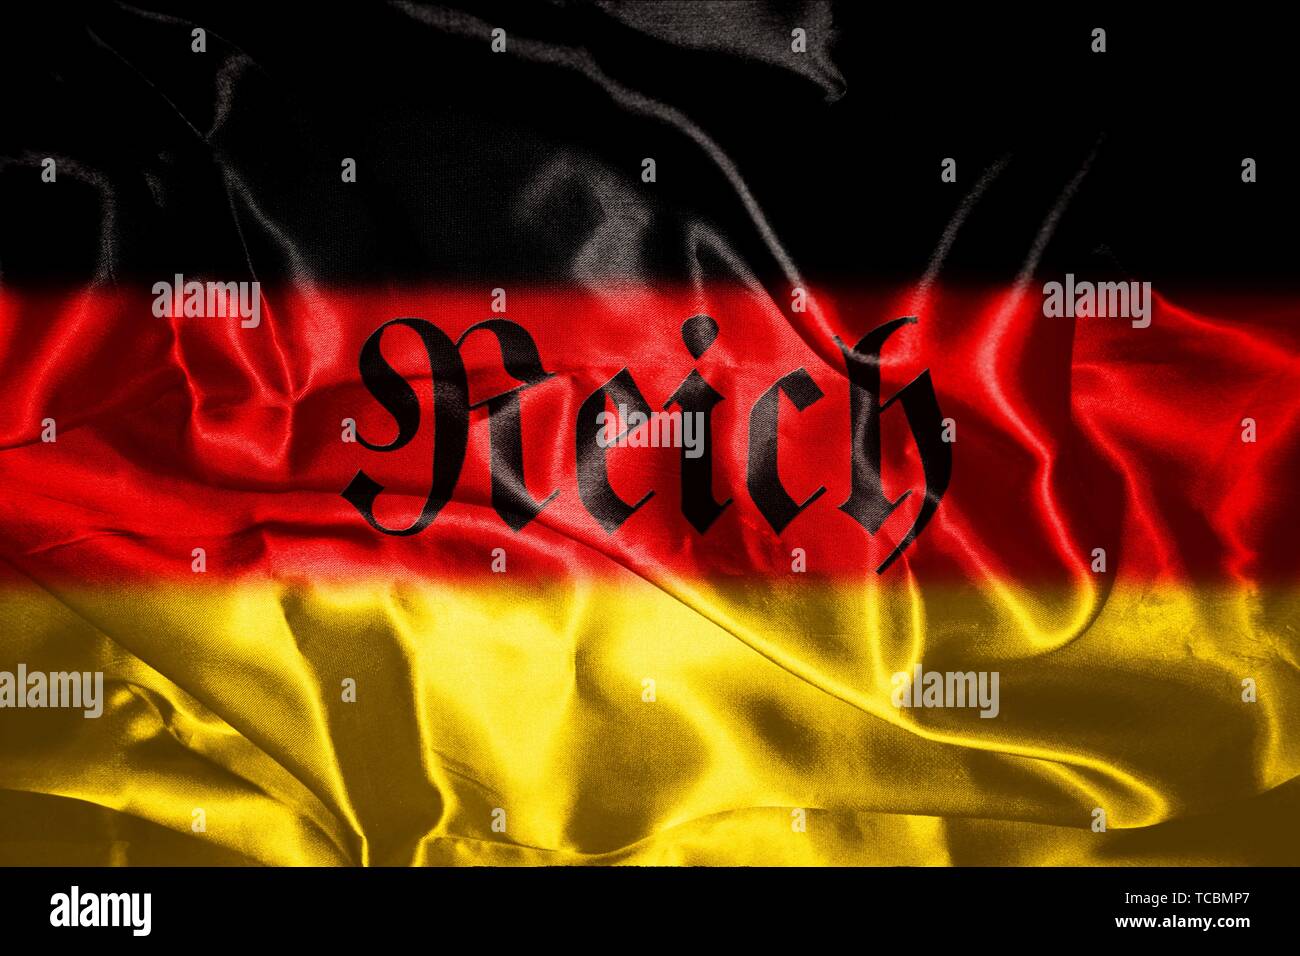 German flag blowing in the wind With Reich Written On It Which Means Realm. Stock Photo